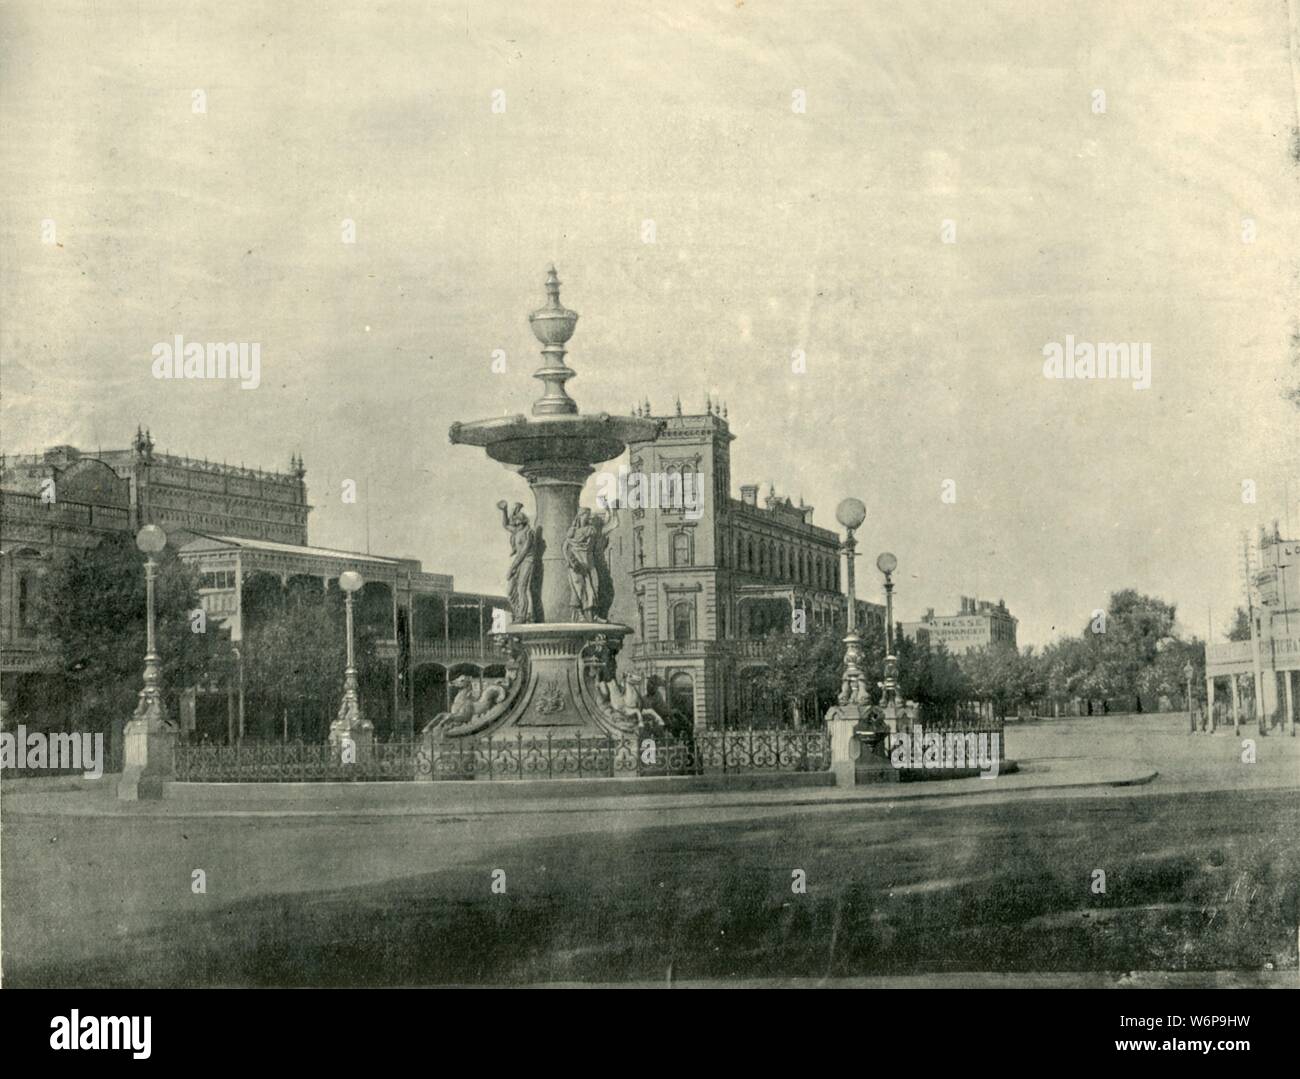 'Fountain, Pall Mall, Bendigo', 1901. Alexandra Fountain designed by William Vahland, named in honour of Alexandra, Princess of Wales in 1881. Benigo was a gold rush boomtown of the Victorian-era 1850s.From &quot;Federated Australia&quot;. [The Werner Company, London, 1901] Stock Photo